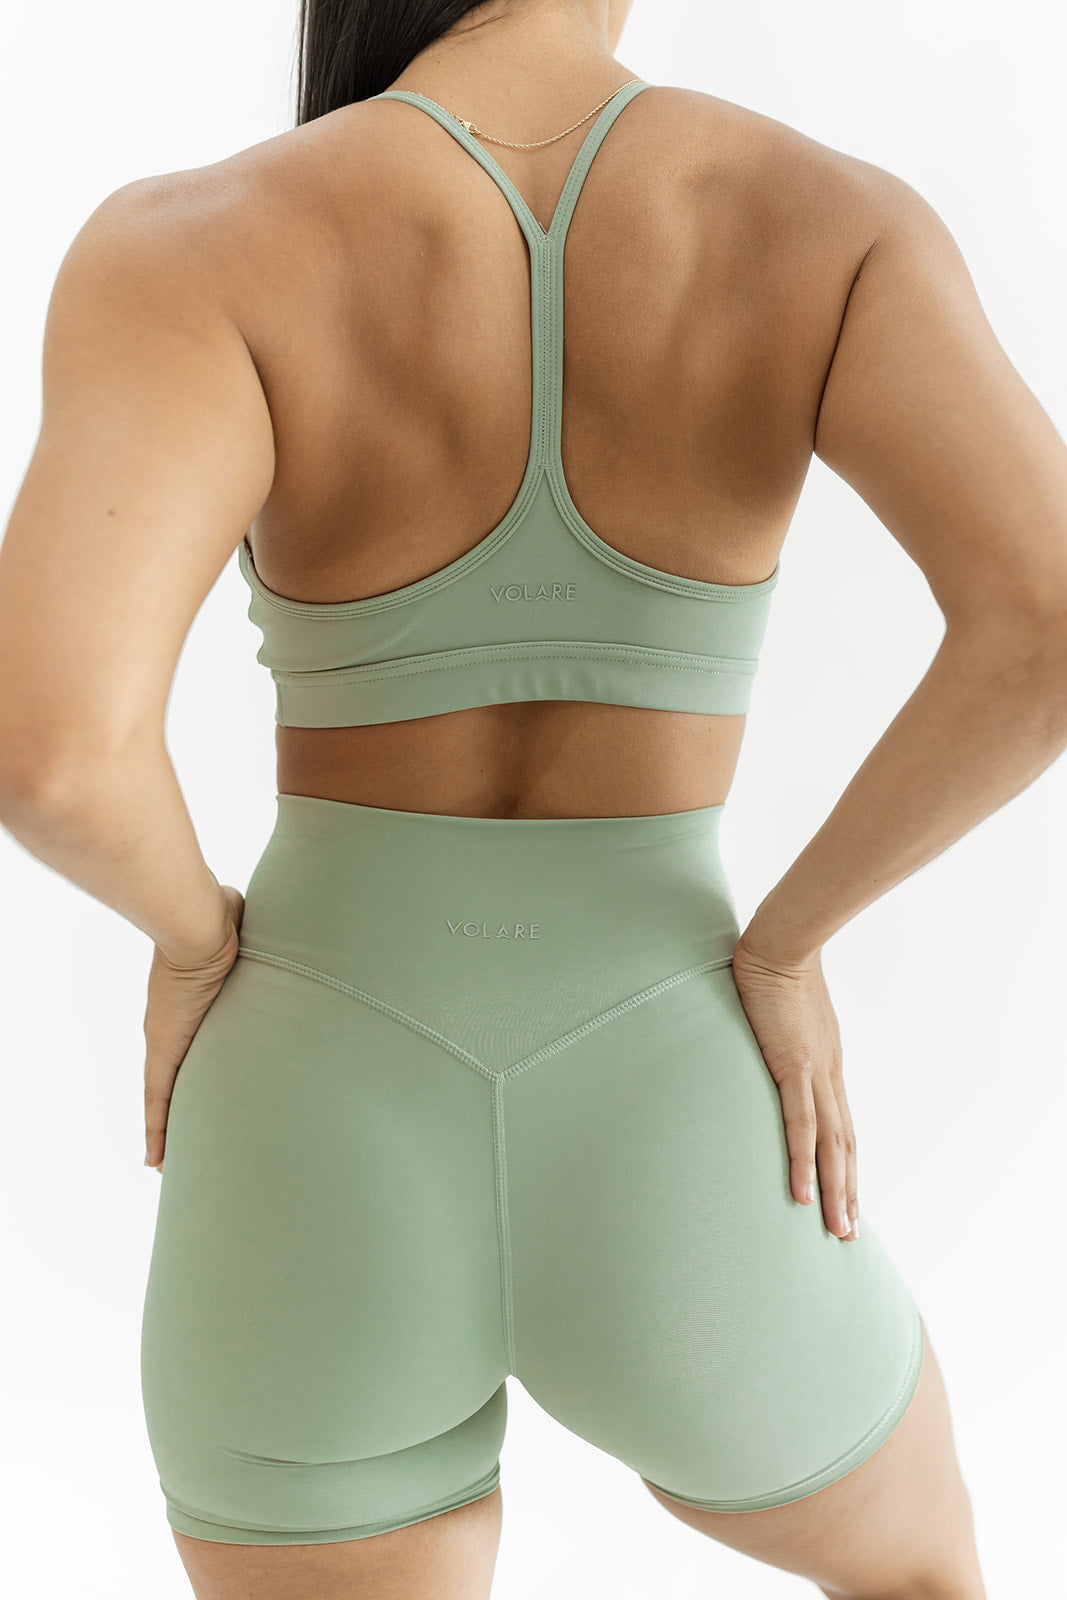 Back of Biker Shorts with Booty Enhancing Seams and Moss Bra with a flattering back, perfect for your everyday